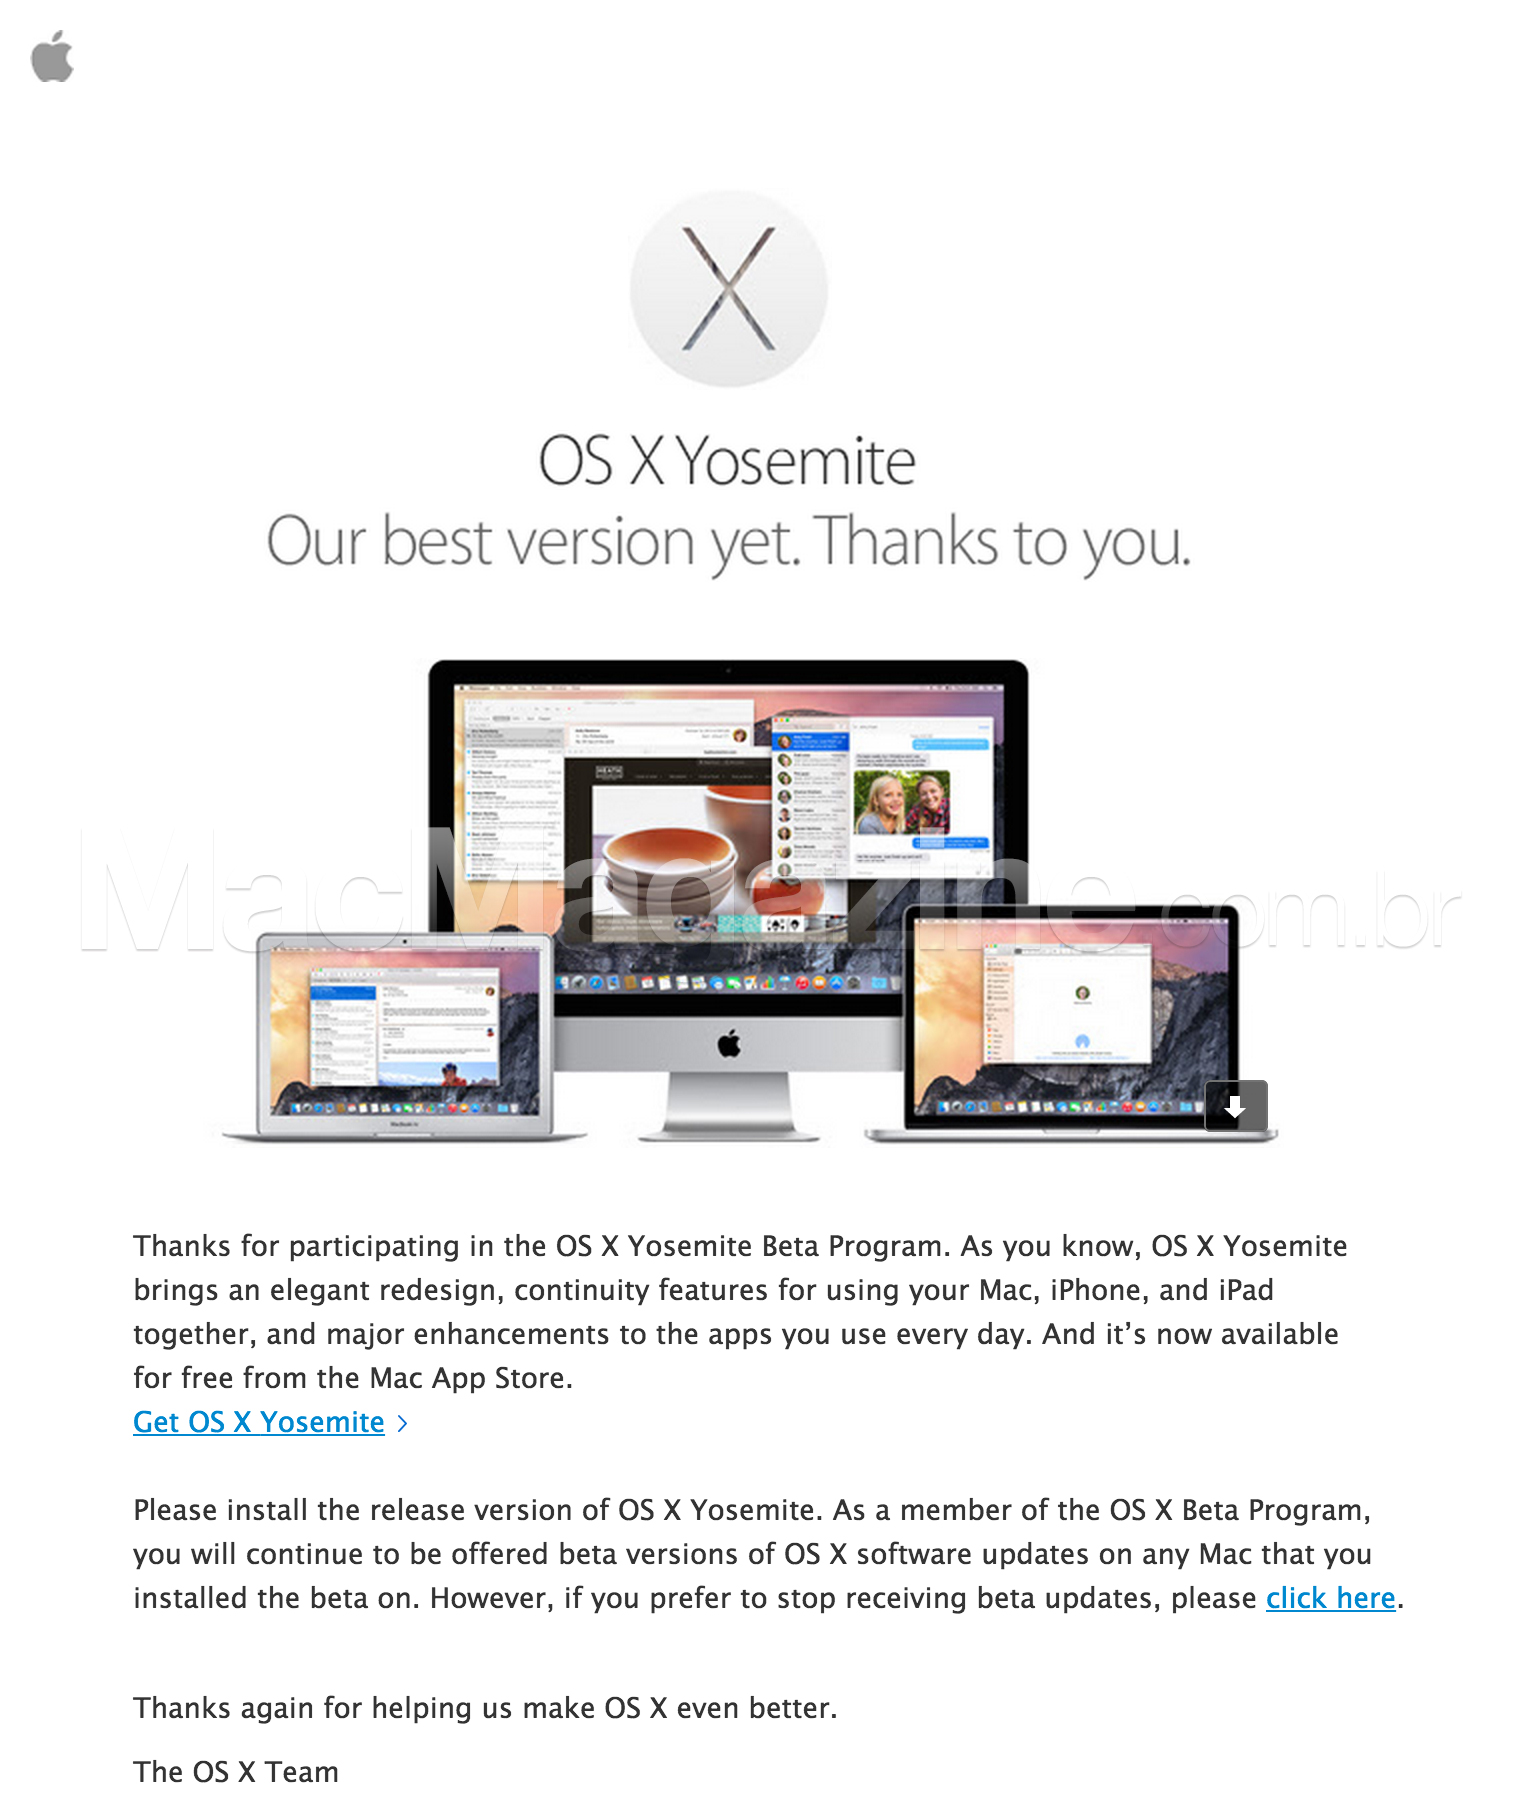 Apple indicates it will continue with the OS X Beta Program